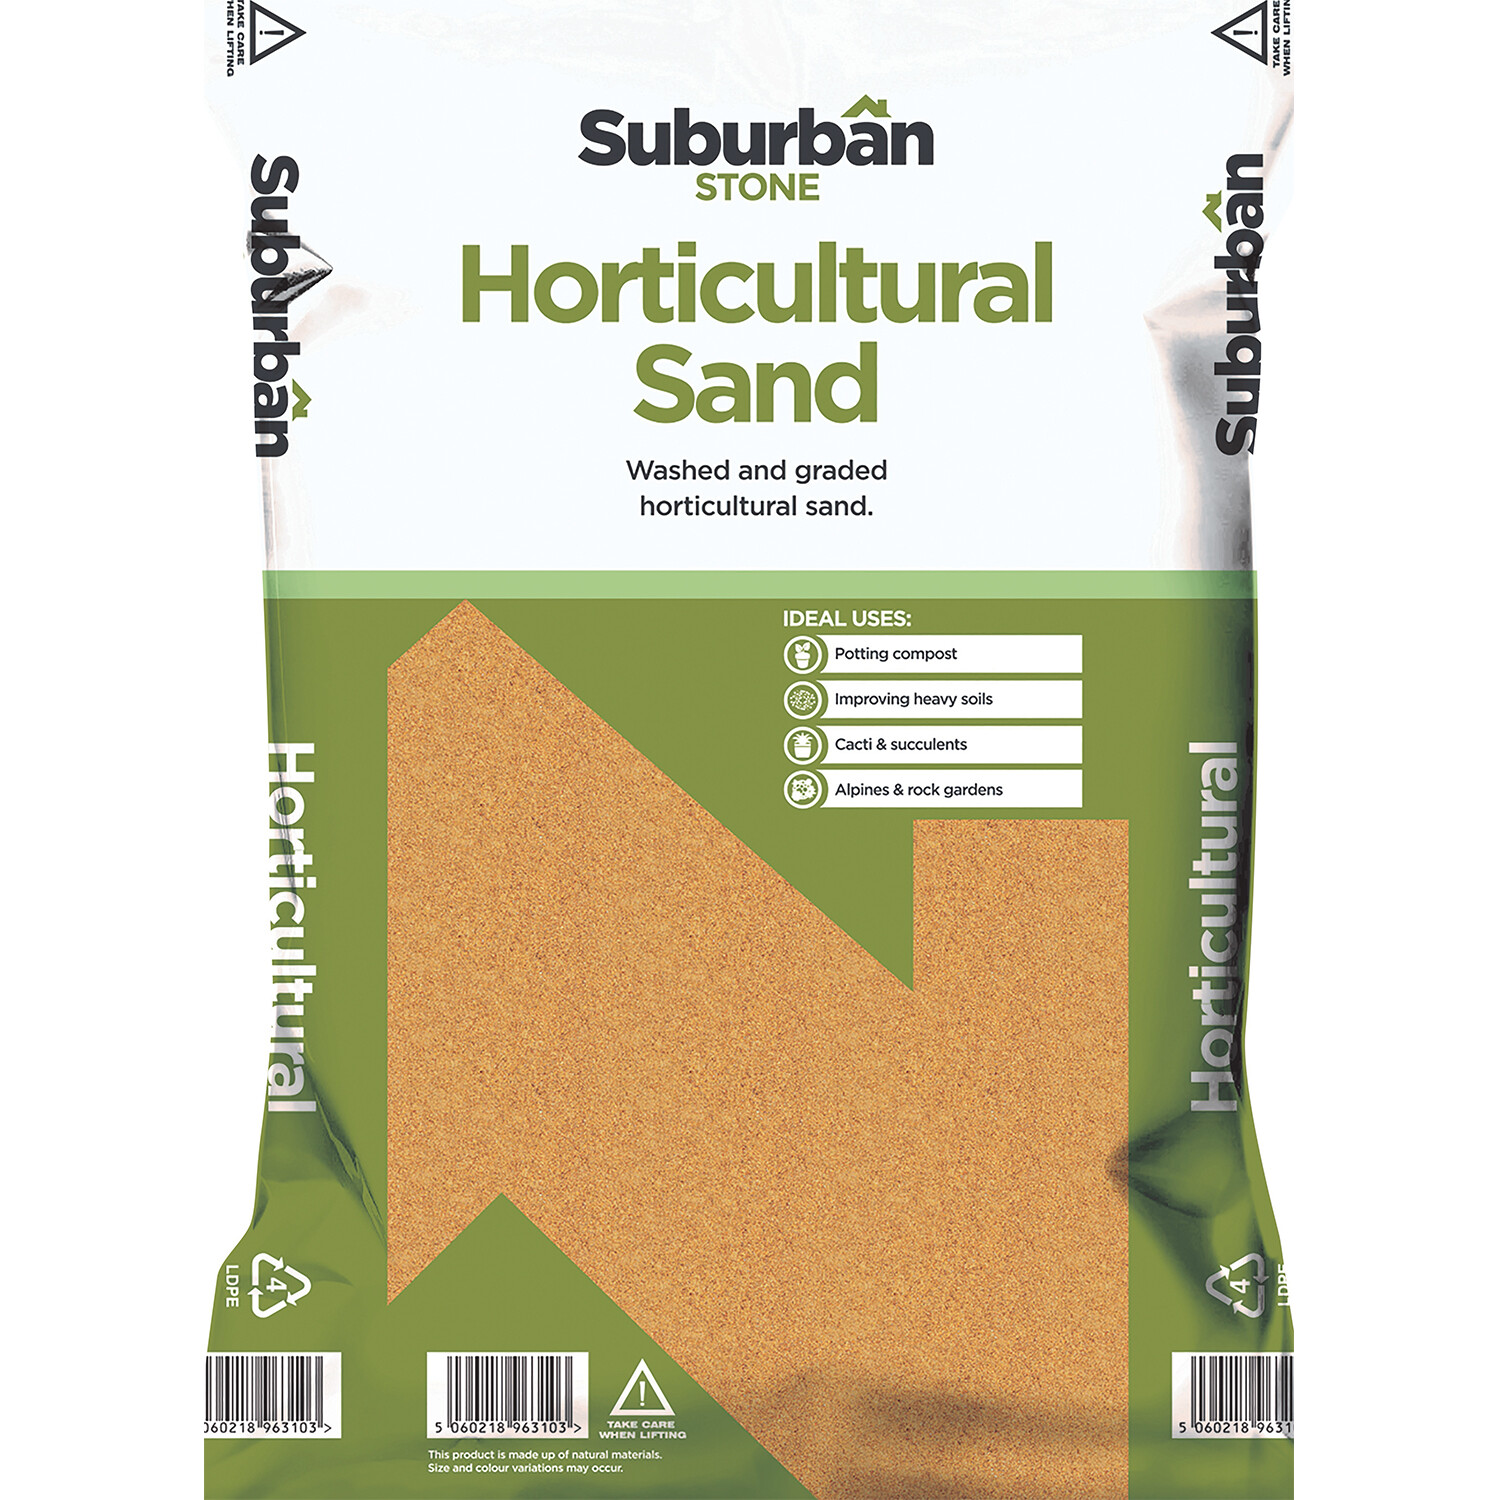 Suburban Stone Horticultural Sand 20kg Image